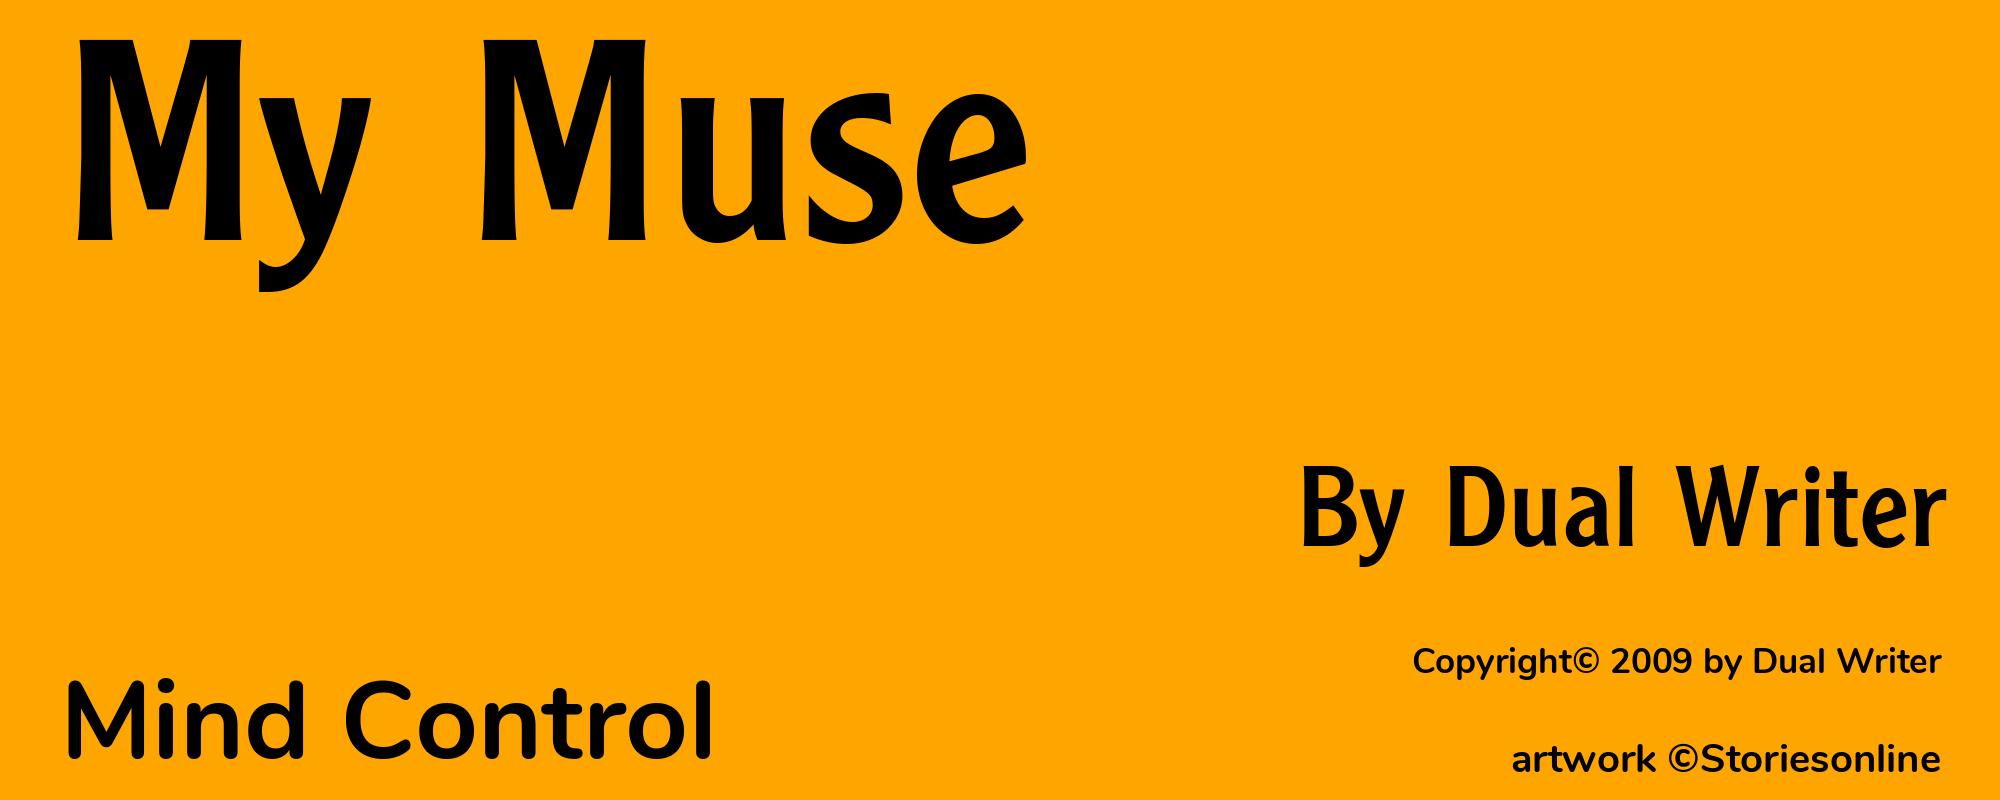 My Muse - Cover